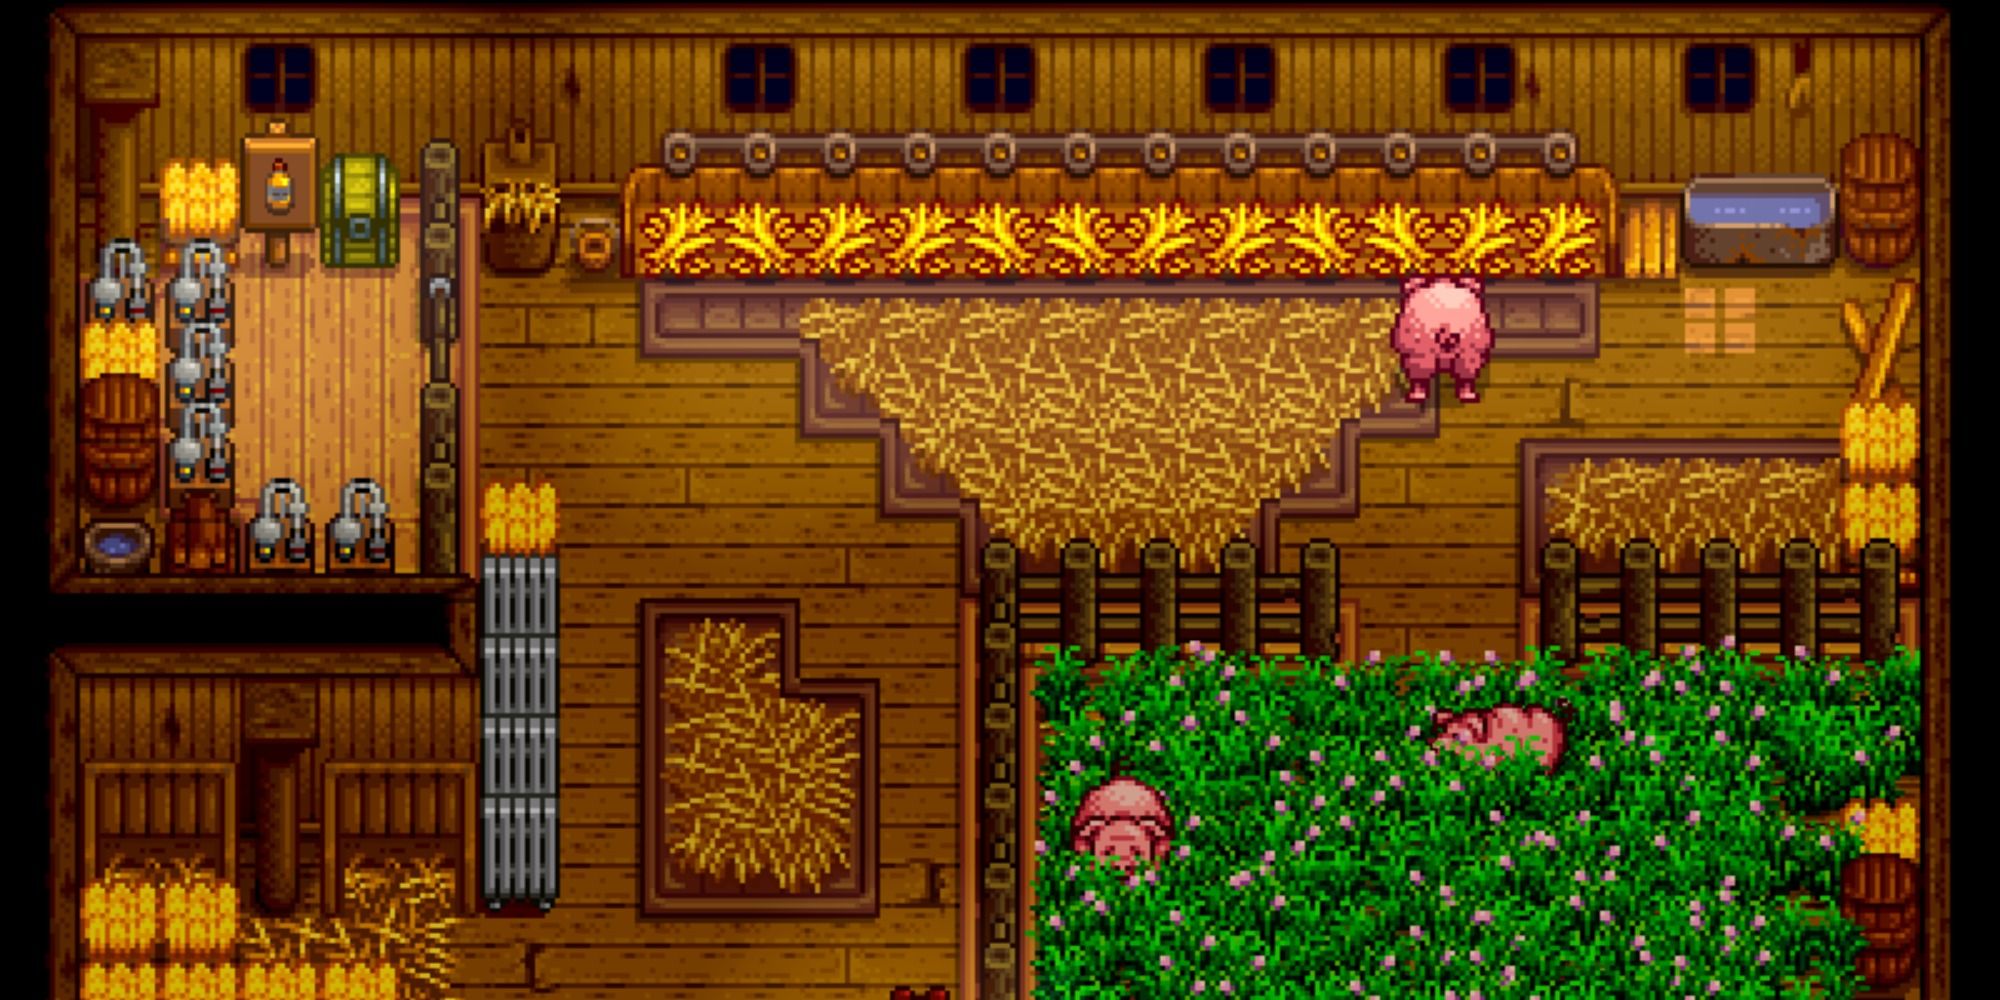 Stardew Valley barn full of pigs, grass and multiple oil presser machines